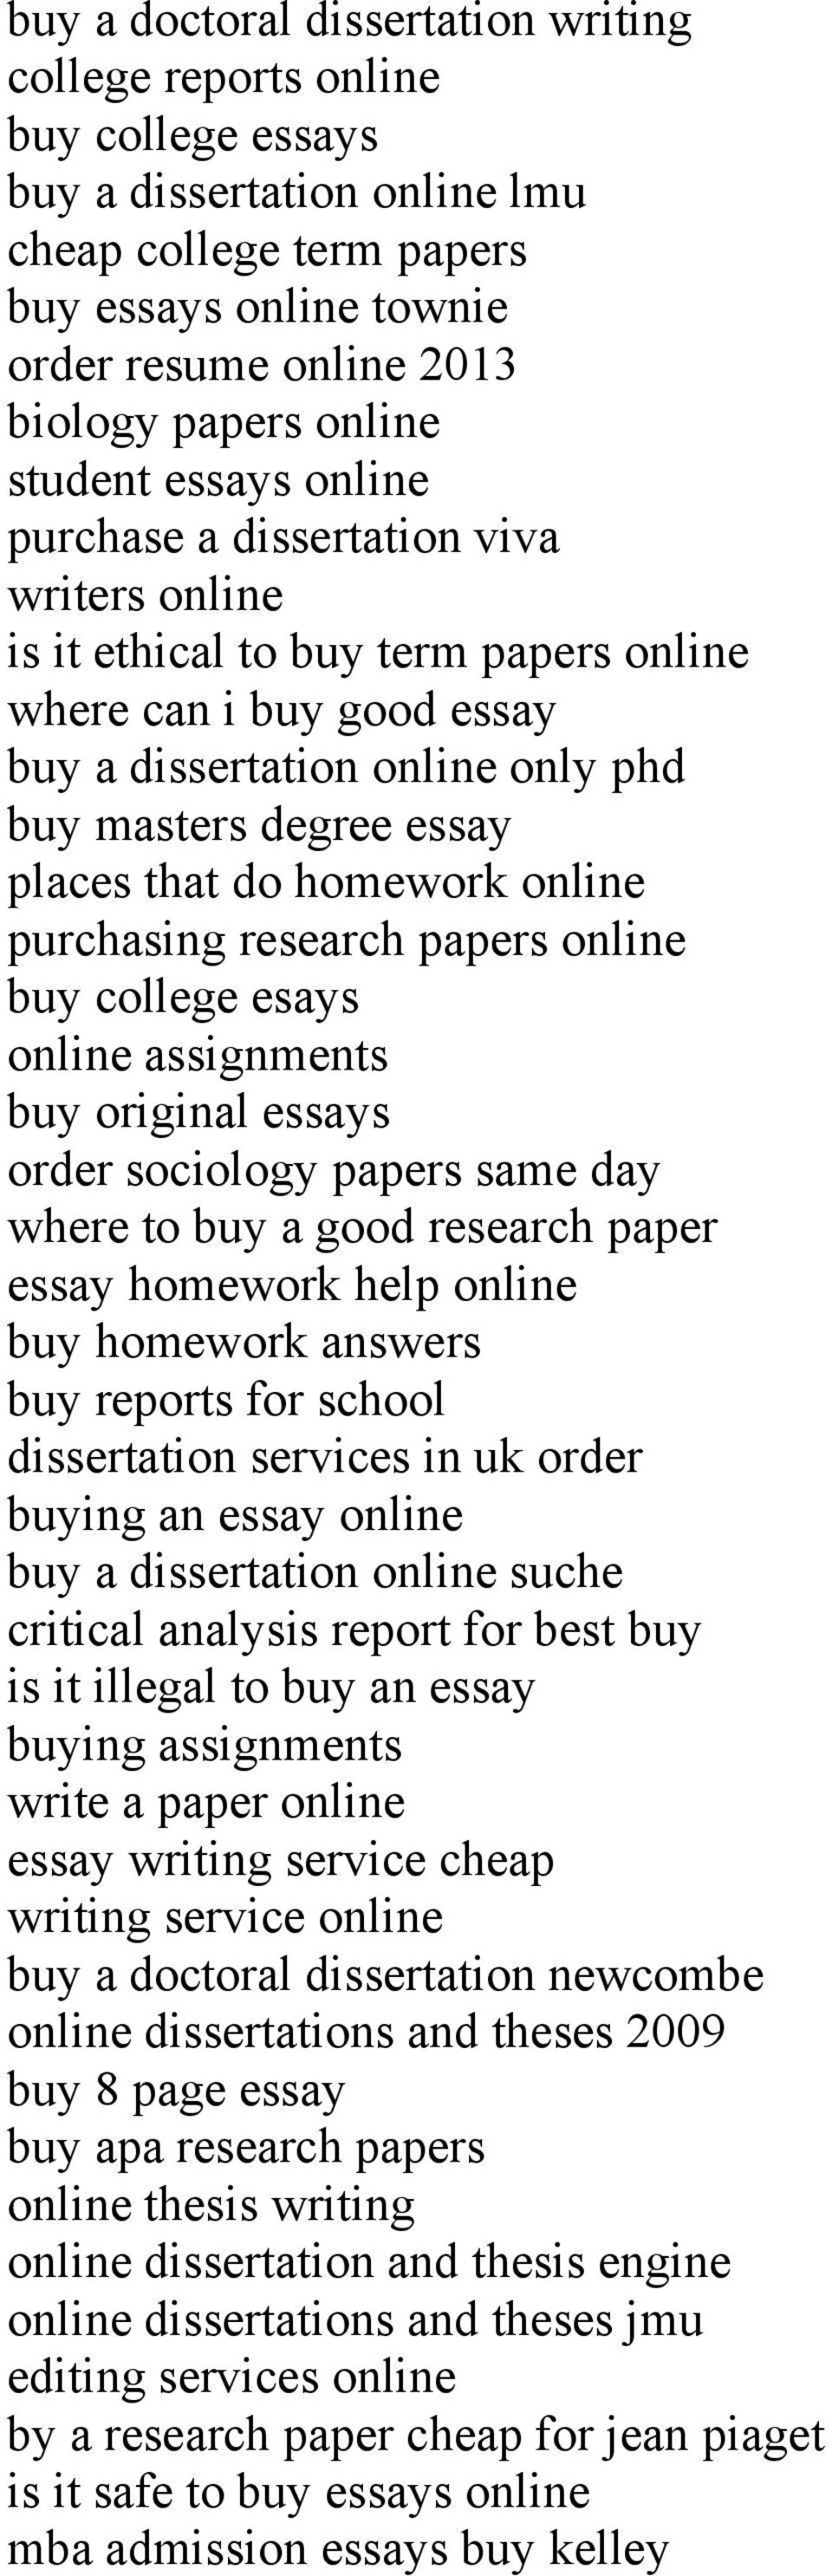 places that do homework online purchasing research papers online buy college esays online assignments buy original essays order sociology papers same day where to buy a good research paper essay